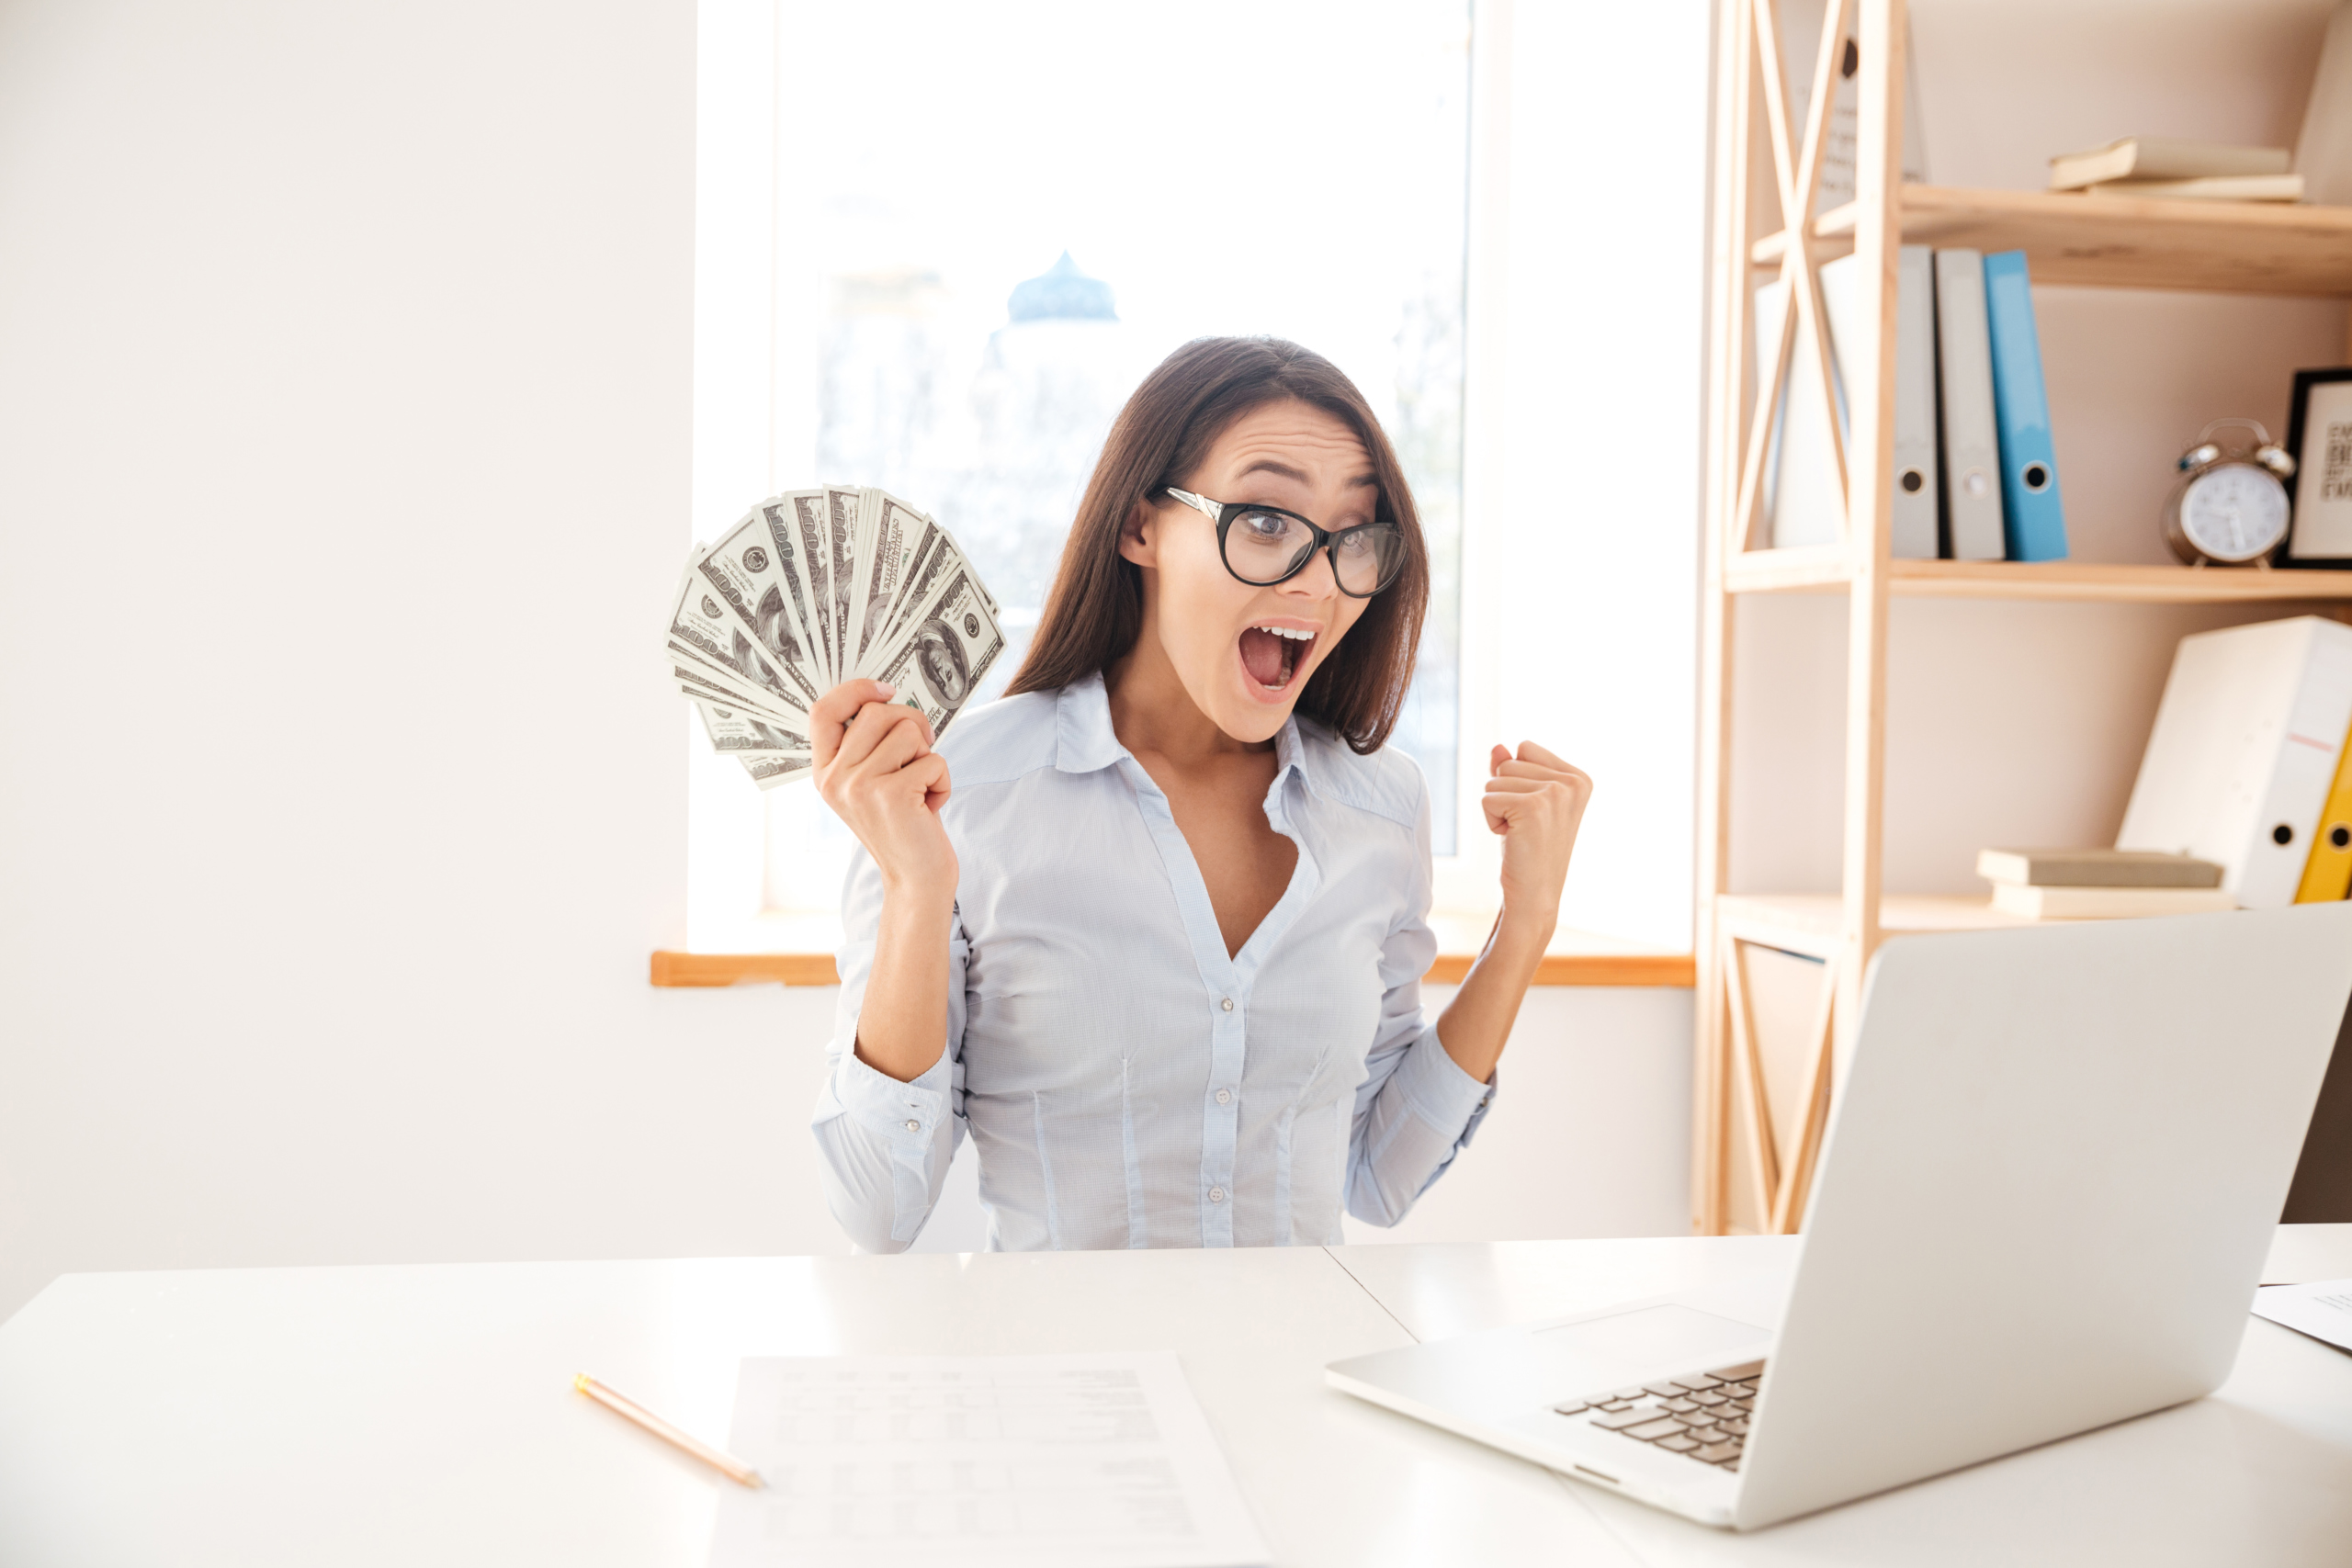 public/uploads/2021/10/graphicstock-image-of-businesswoman-dressed-in-white-shirt-sitting-in-her-office-and-holding-money-in-hand-while-making-winner-gesture_r8TFKKmd3g-scaled.jpg